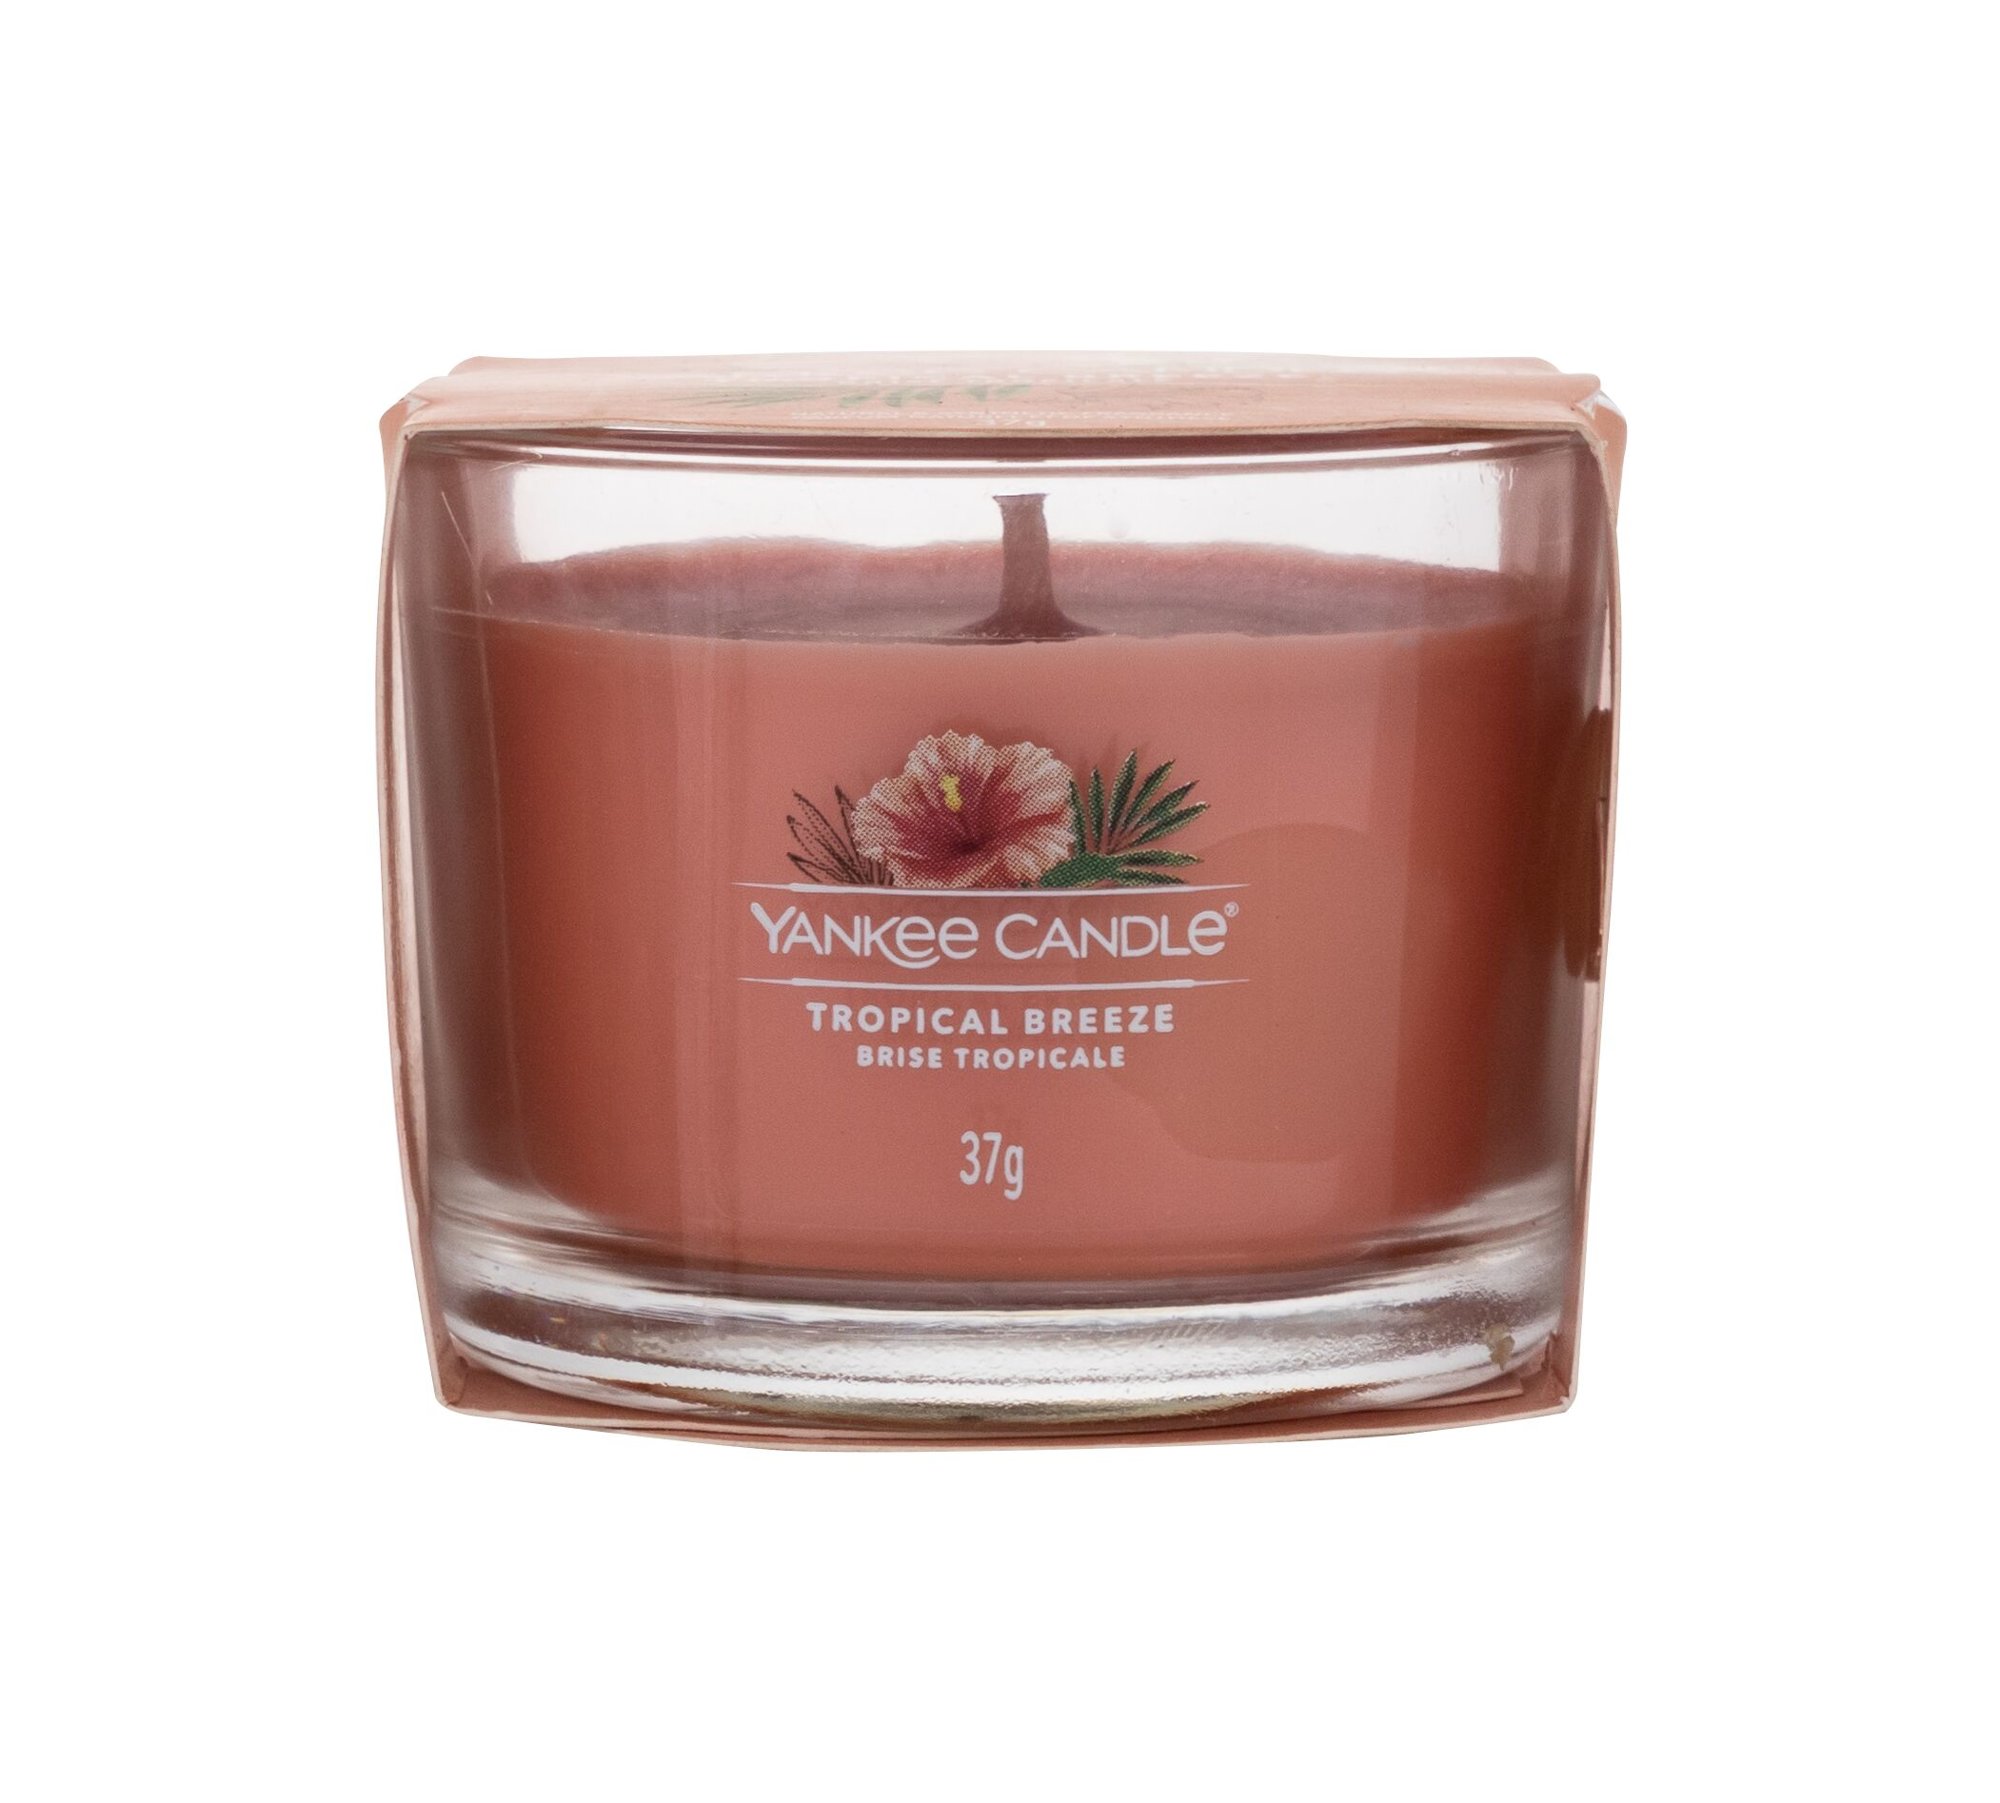 Yankee Candle Tropical Breeze 37g Kvepalai Unisex Scented Candle